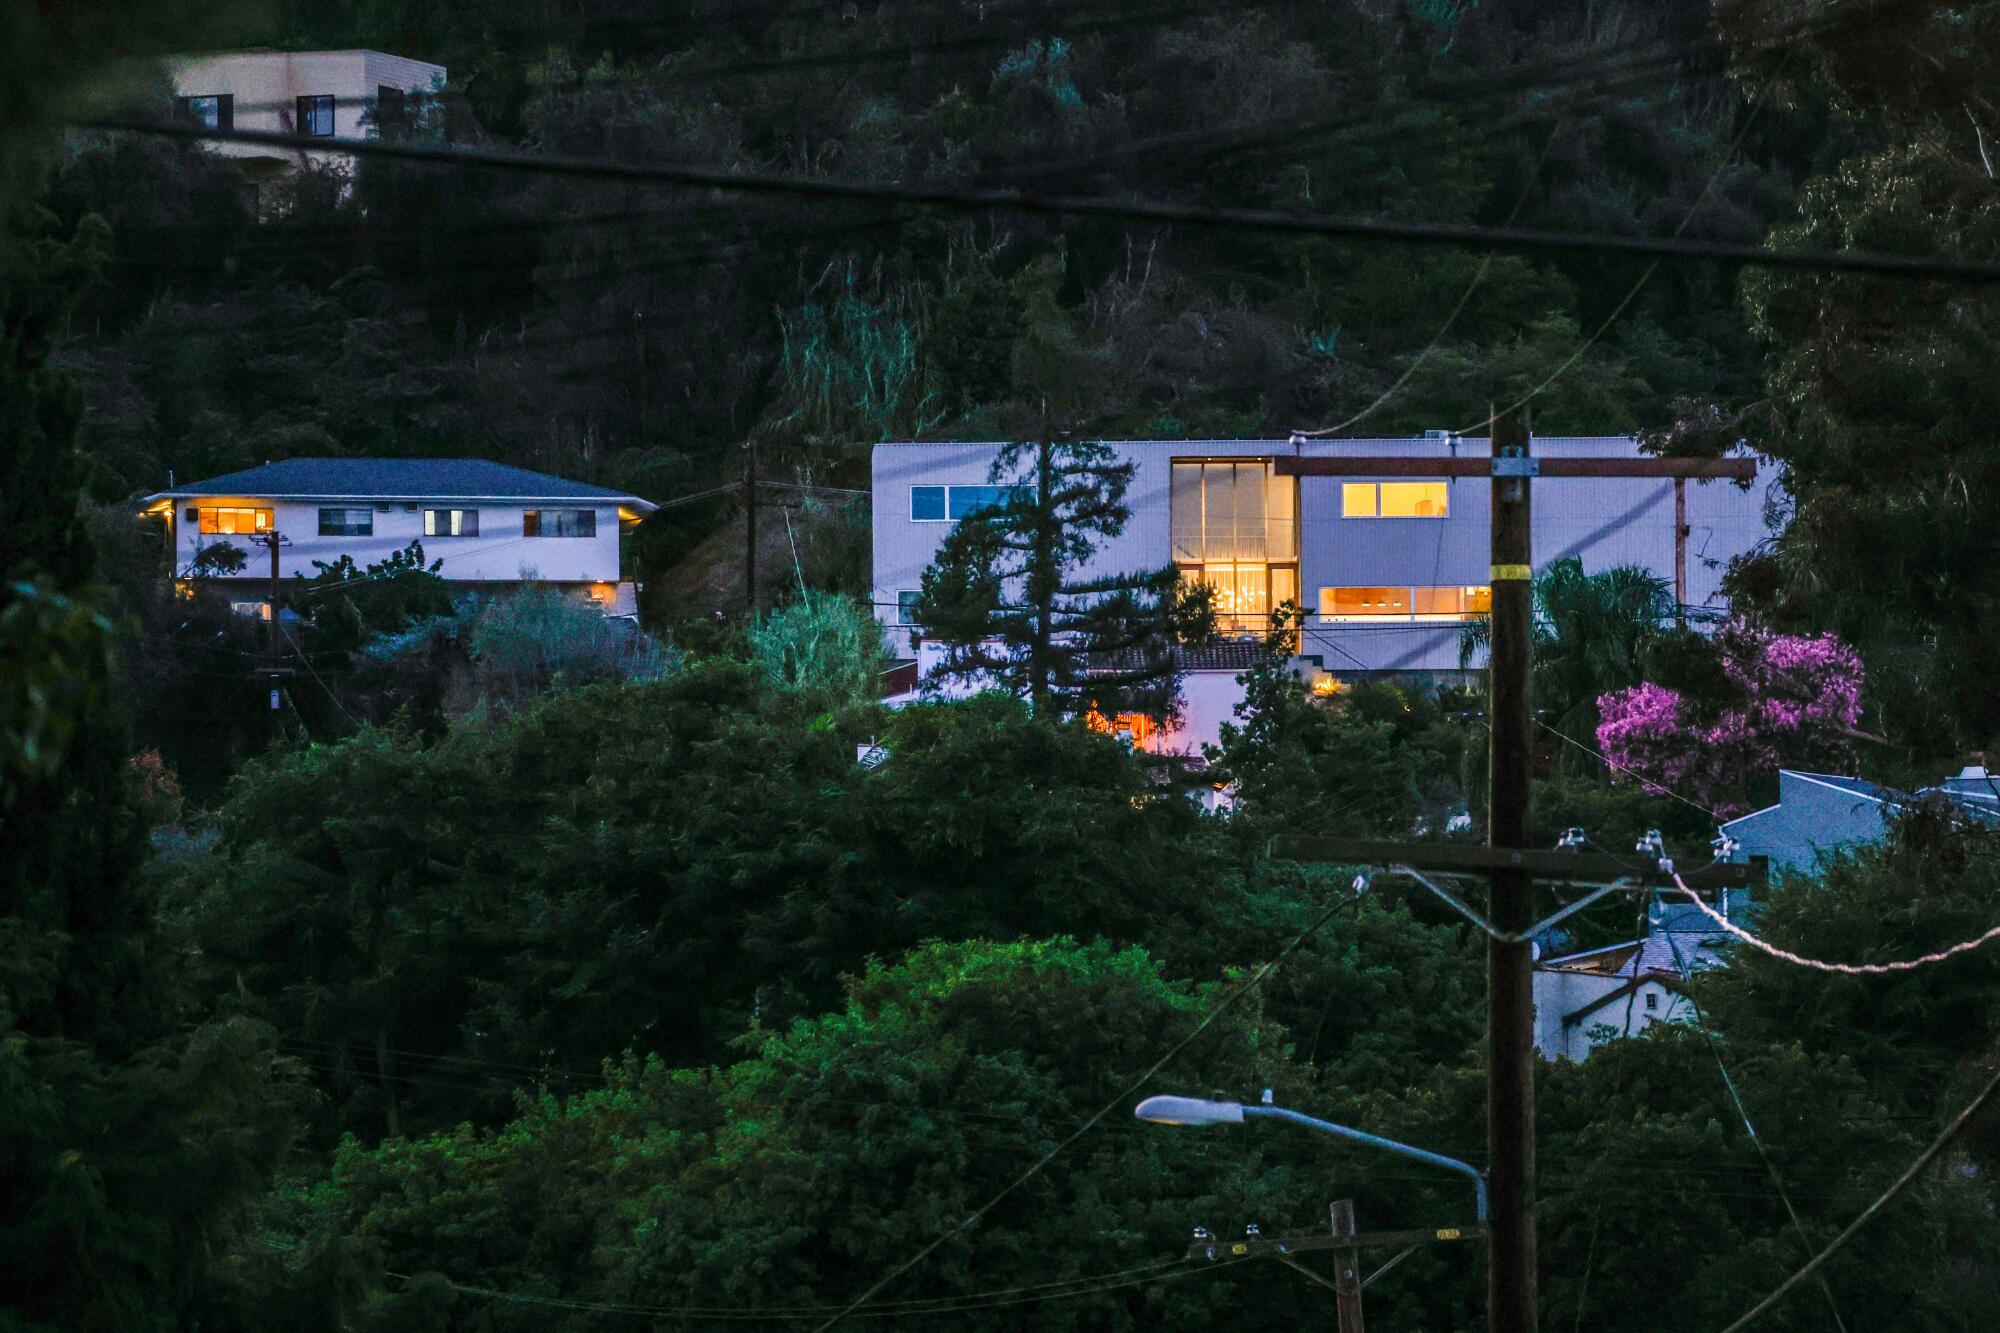 From a distance, a warm yellow light glows inside Simon Storey's home, surrounded by trees, at dusk.